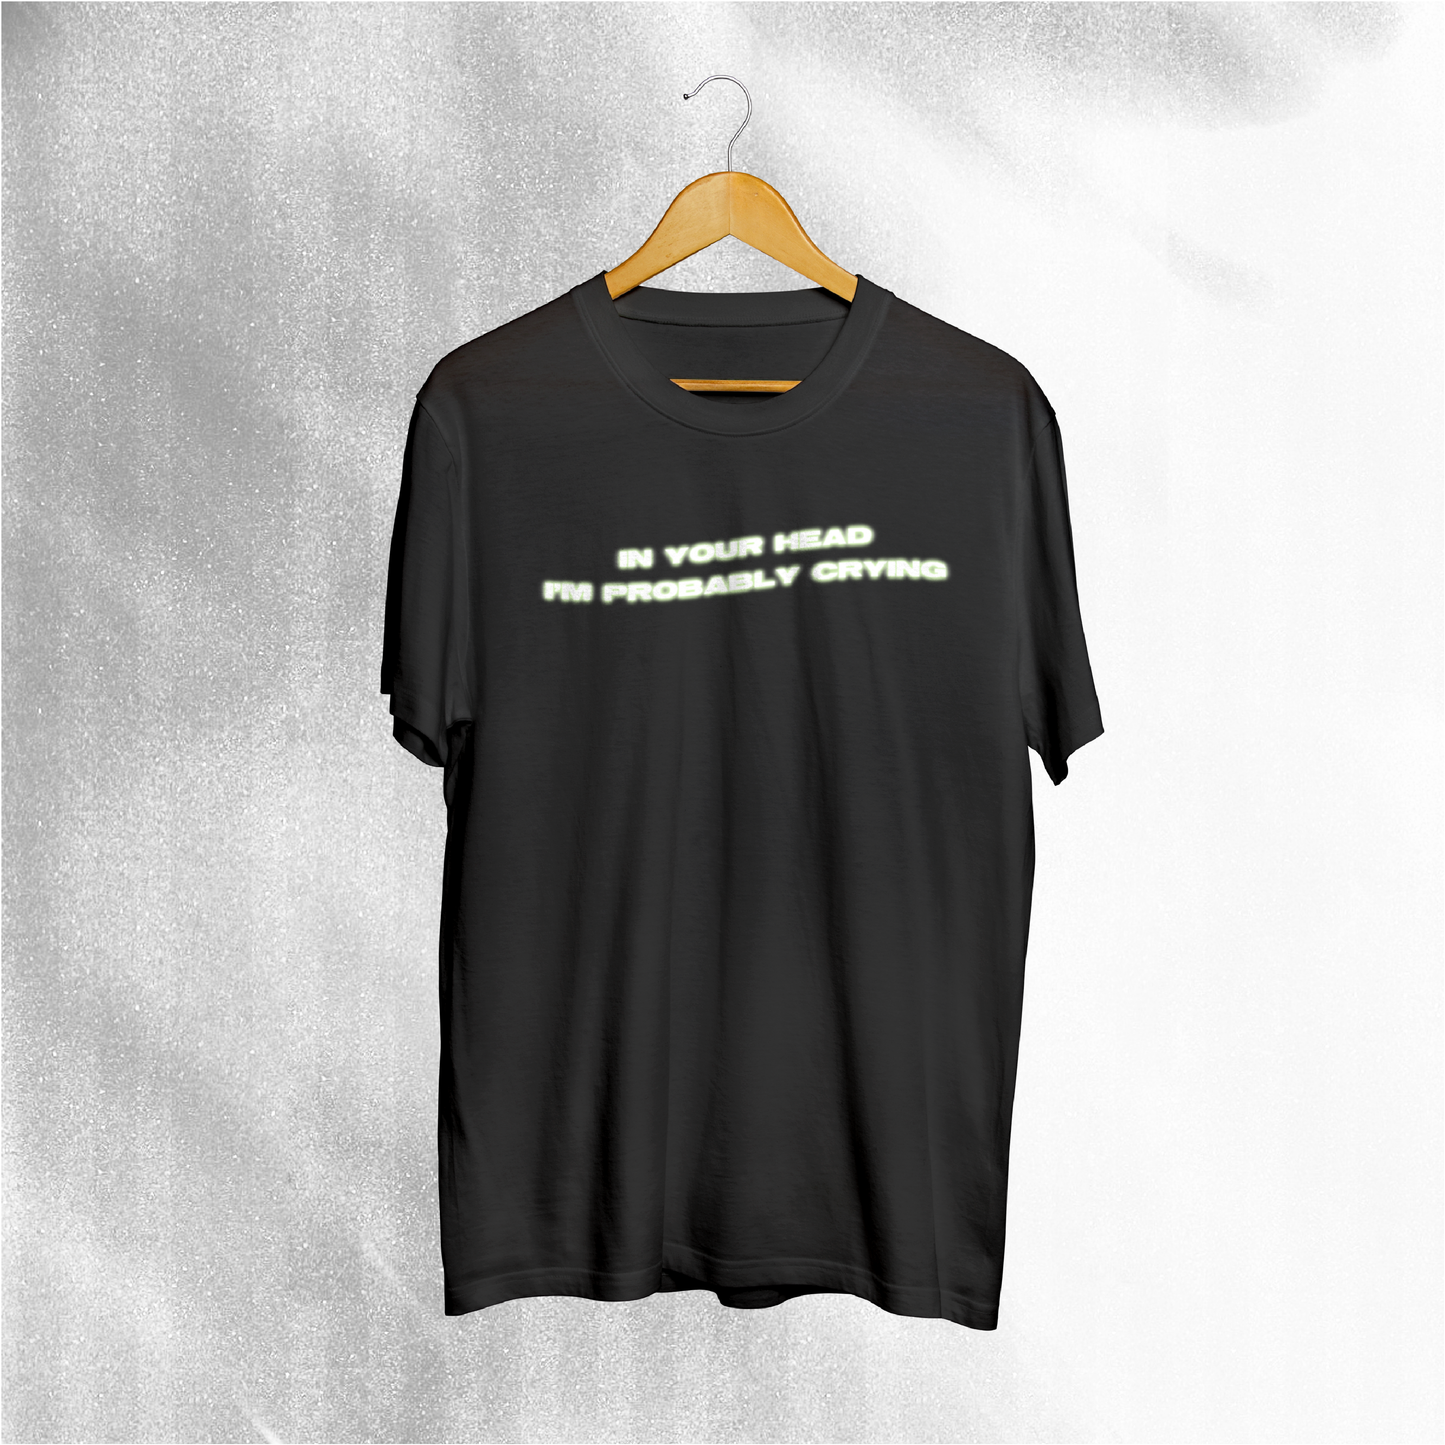 Lucy Deakin - 'in your head i'm probably crying' EP - Merch - T-Shirt